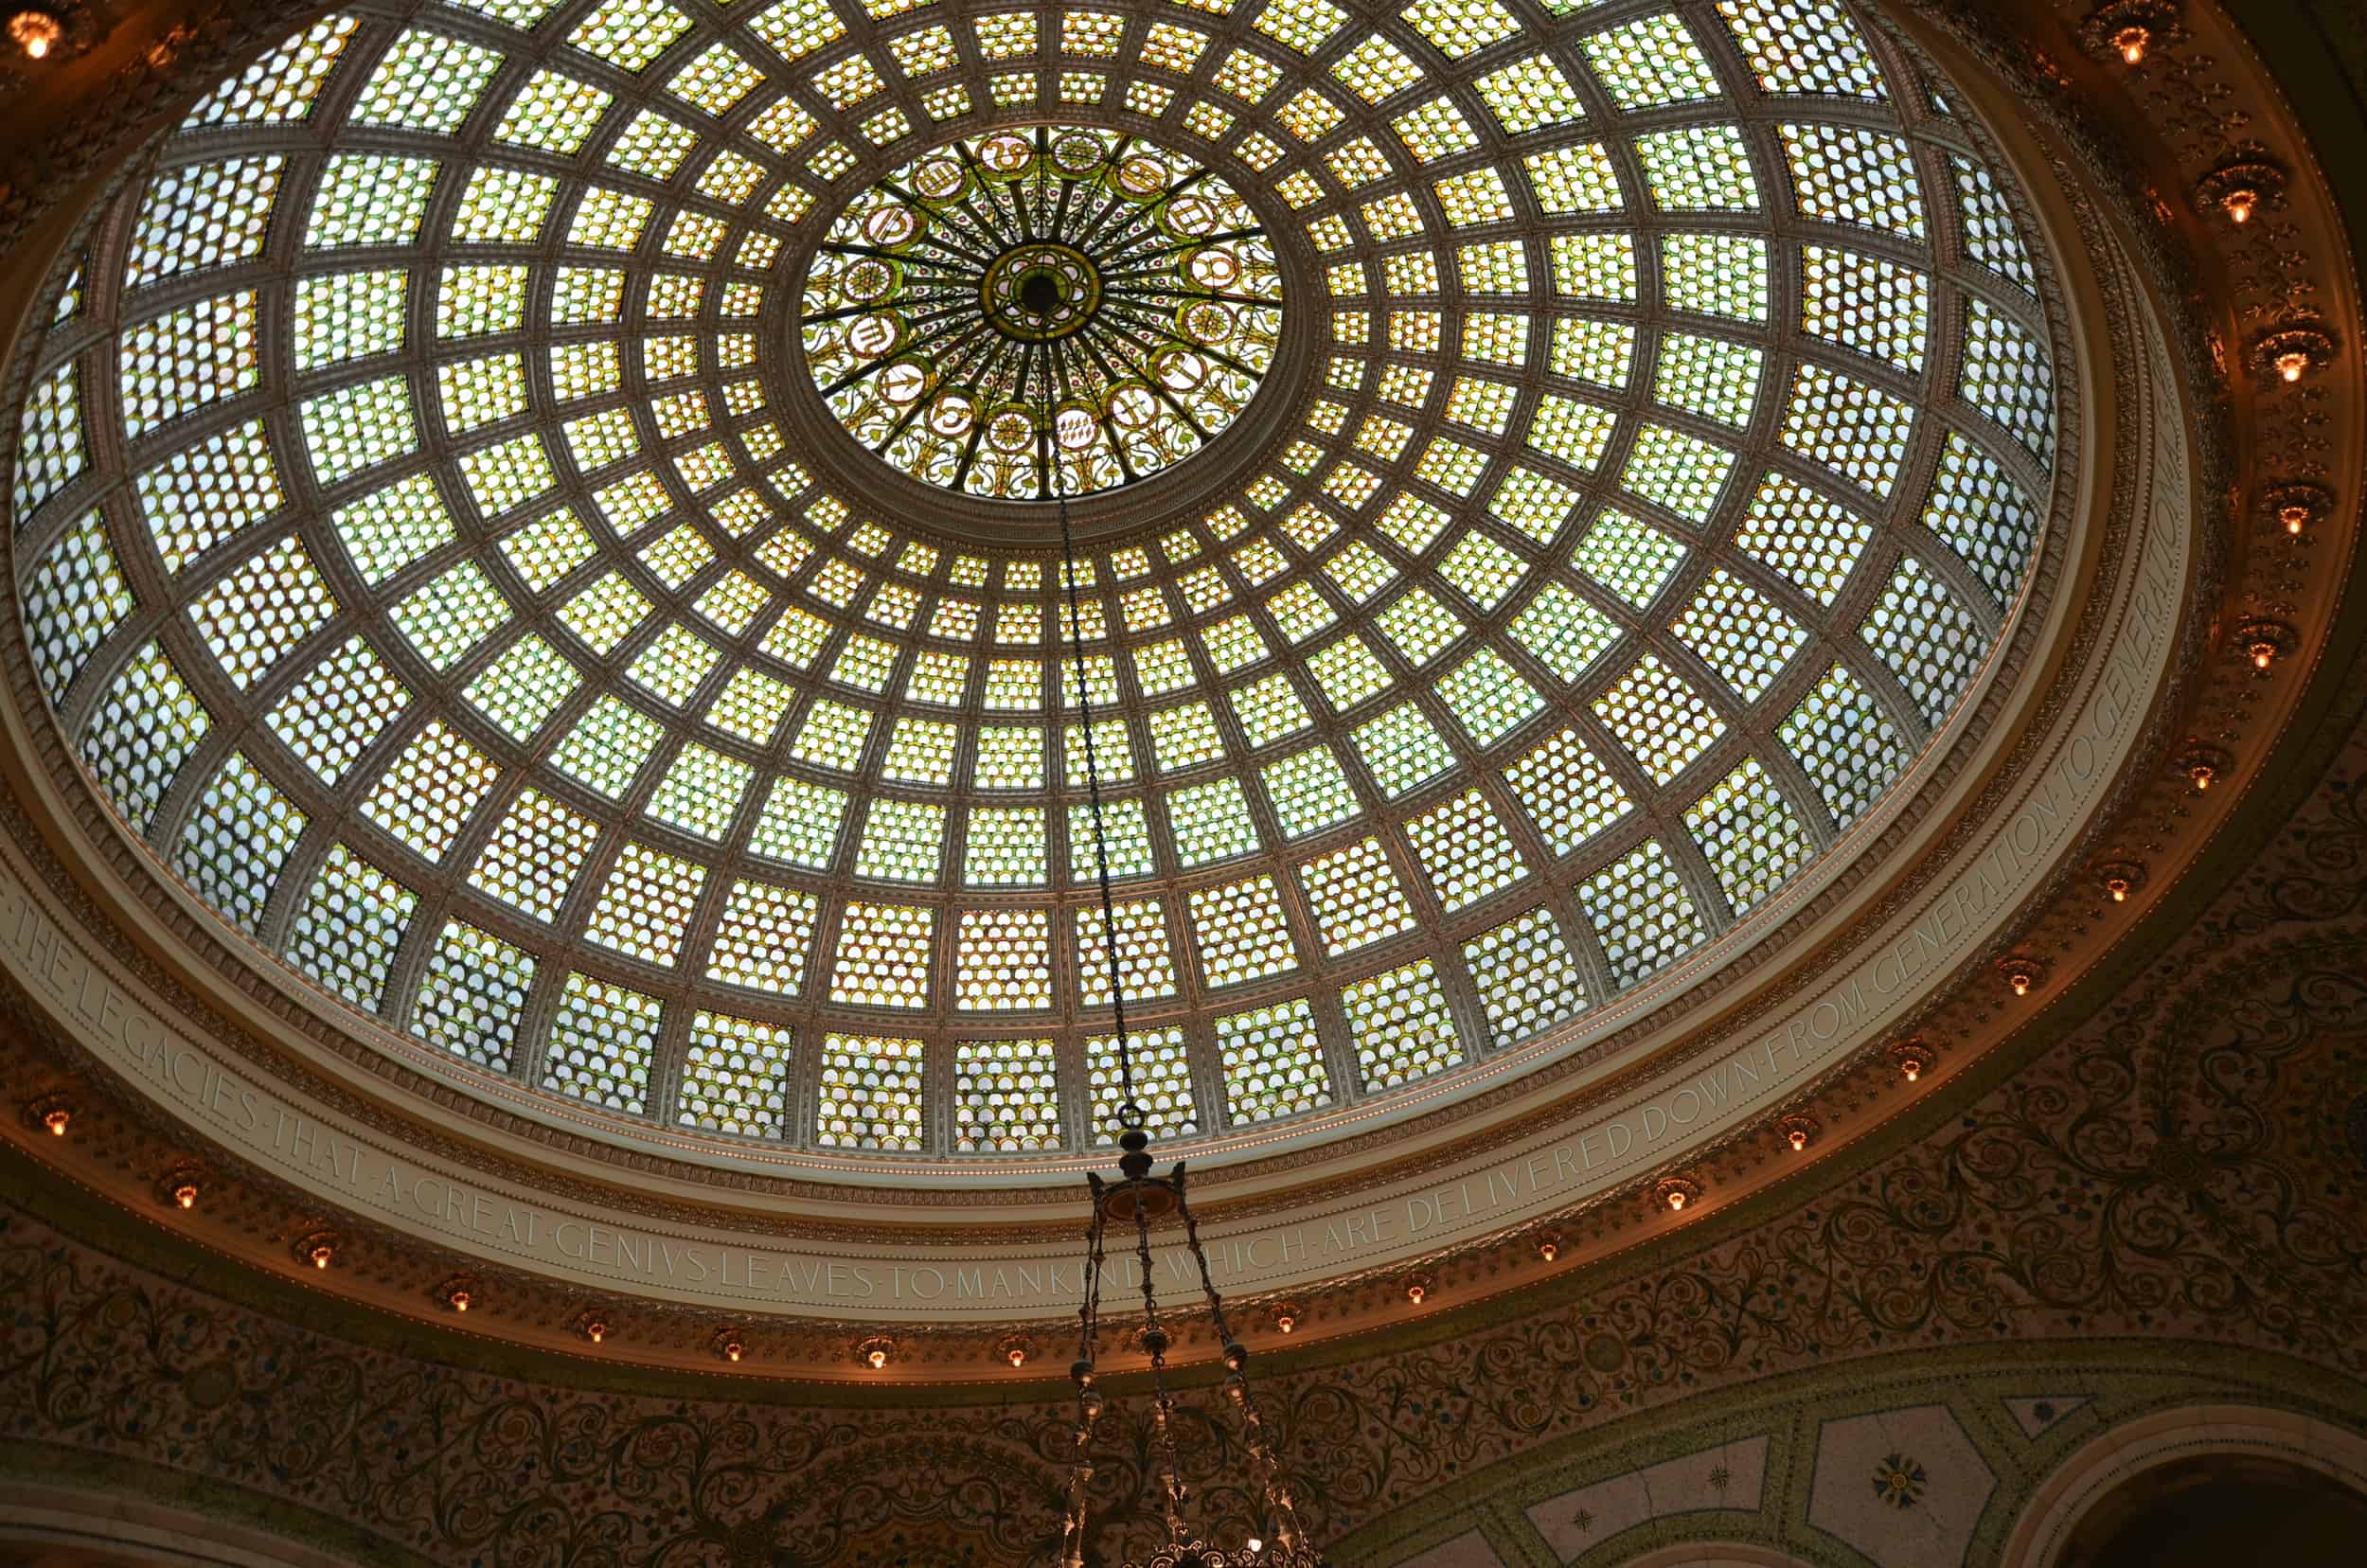 Tiffany dome at the Preston Bradley Hall at the Chicago Cultural Center in Chicago, Illinois